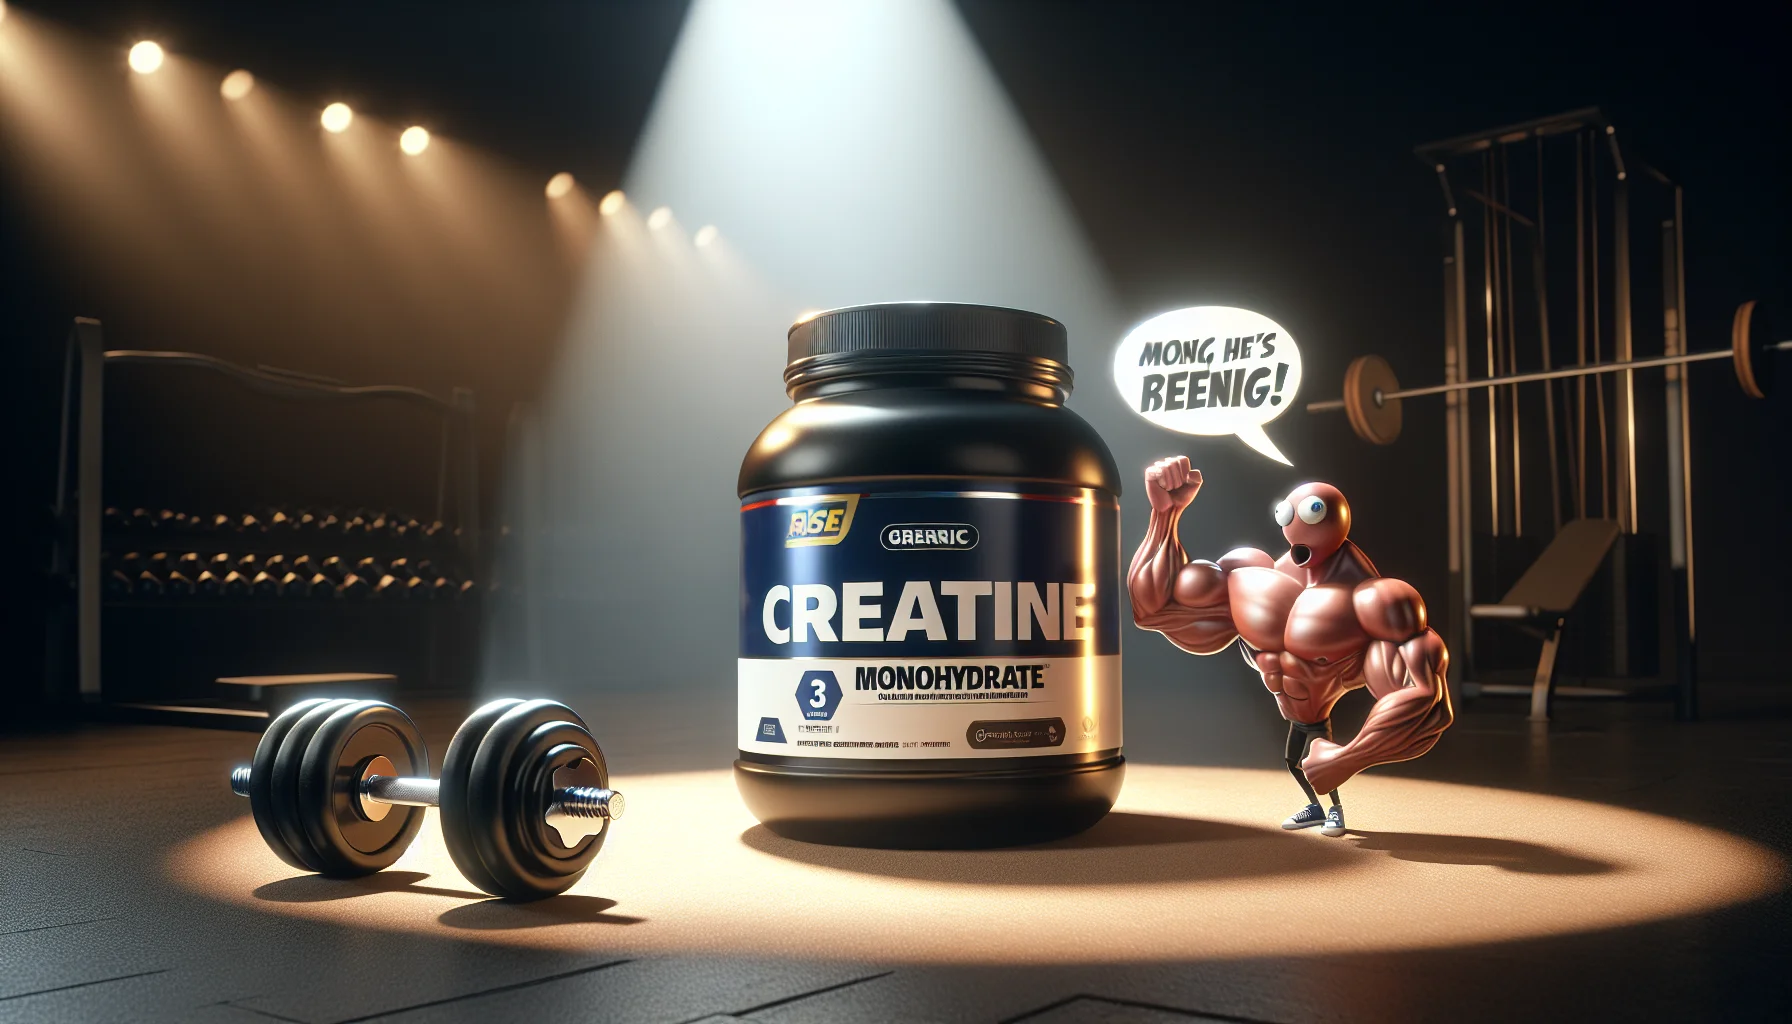 Create an amusing, realistic scene centered around a generic creatine monohydrate supplement container with the brand name 'Rise'. The container should look attractive and inviting, glowing under spotlight. Perhaps juxtapose it with a dumbbell on one side and a muscular cartoonish arm on the other, impersonating the power of the creatine supplement. Add a speech bubble from the arm exclaiming enthusiastically about the benefits of the supplement. The background can be a gym or a sporting arena setting to imply the connection of the supplement to sports. The overall atmosphere should be light-hearted and enticing, encouraging people towards fitness and sports supplements.